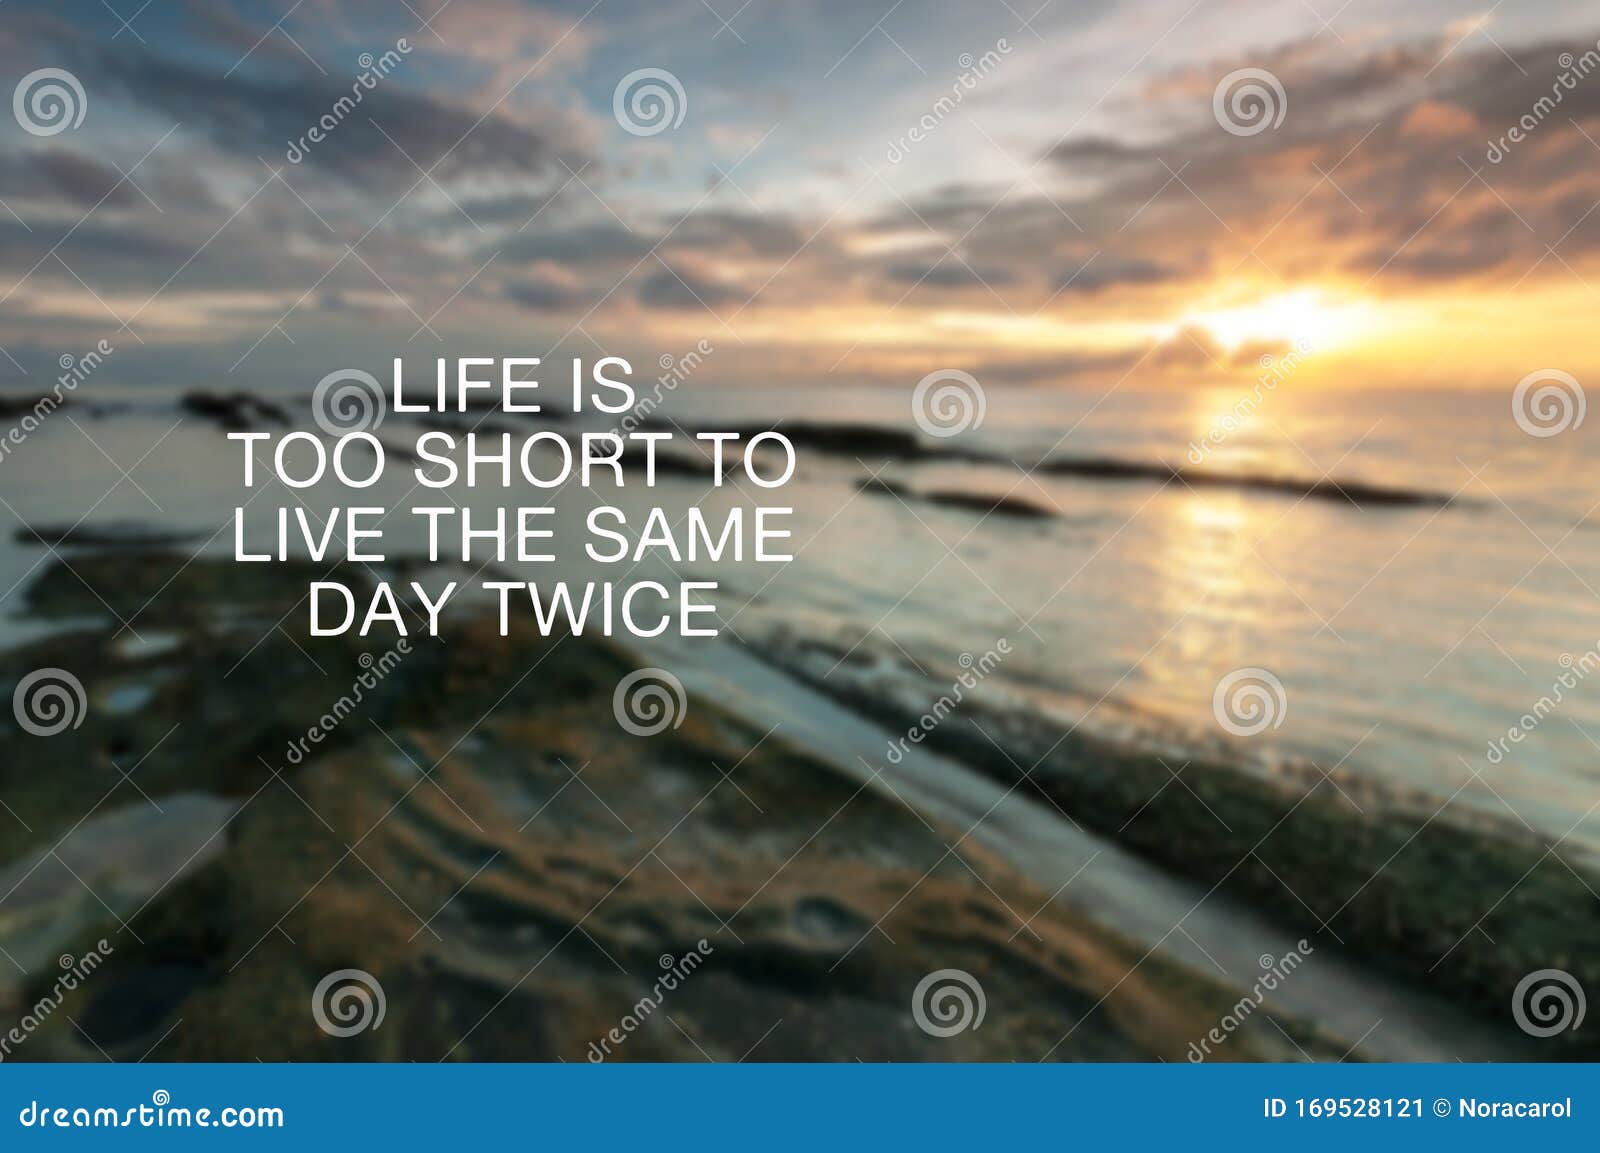 3 Live Life Quotes Photos Free Royalty Free Stock Photos From Dreamstime